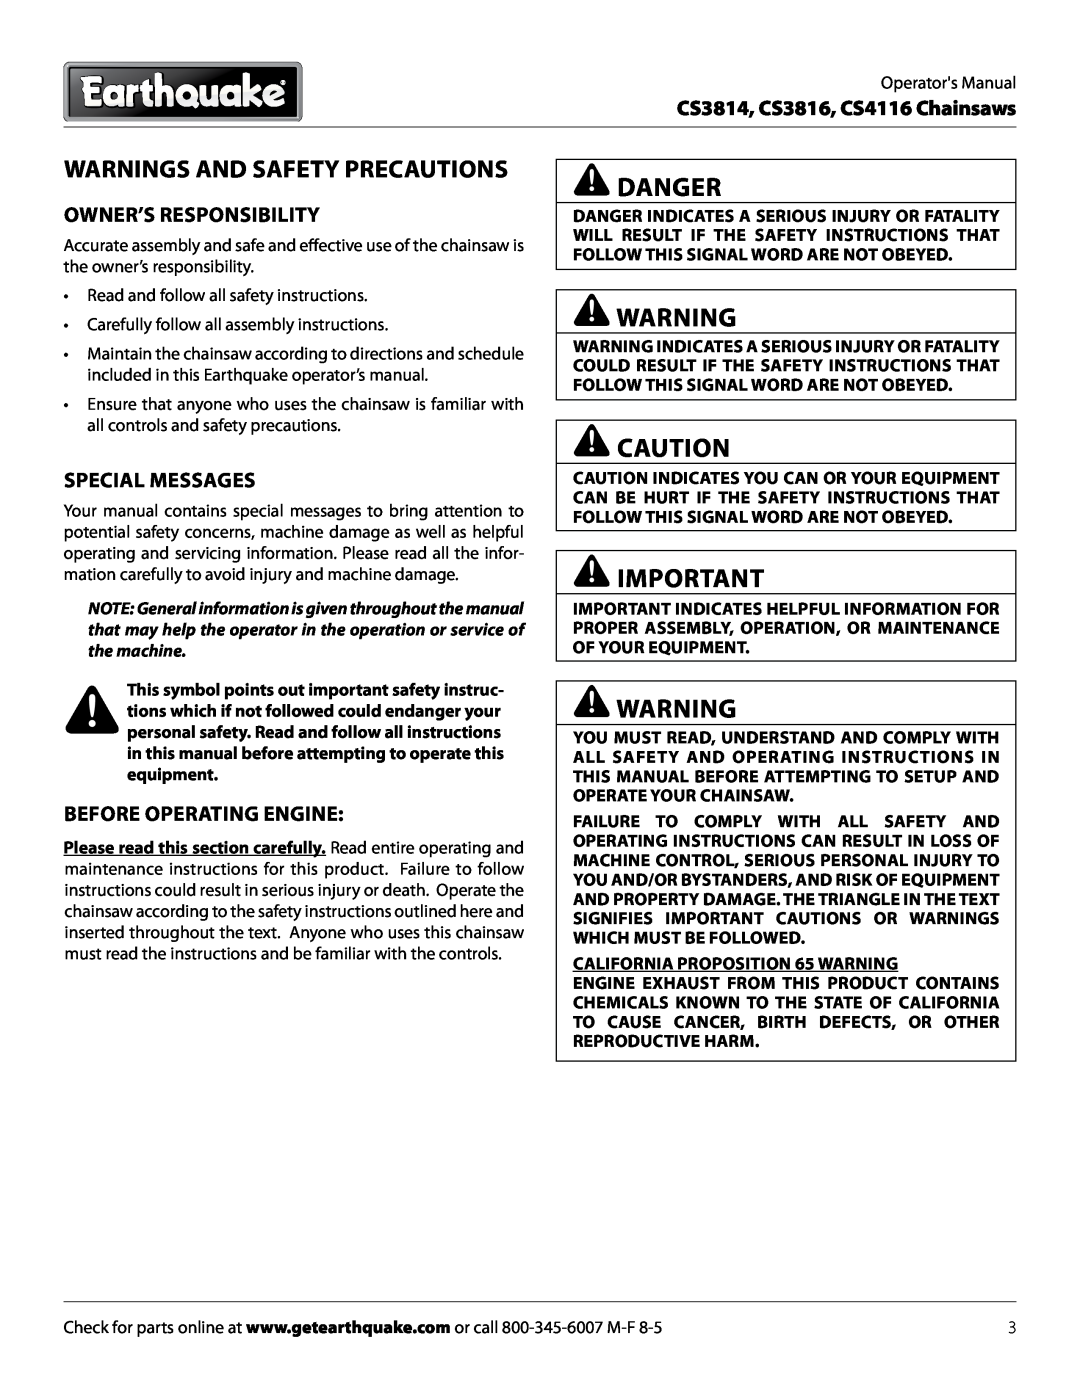 EarthQuake CS3814 manual Warnings and Safety Precautions, Owner’S Responsibility, Special Messages, Before Operating Engine 